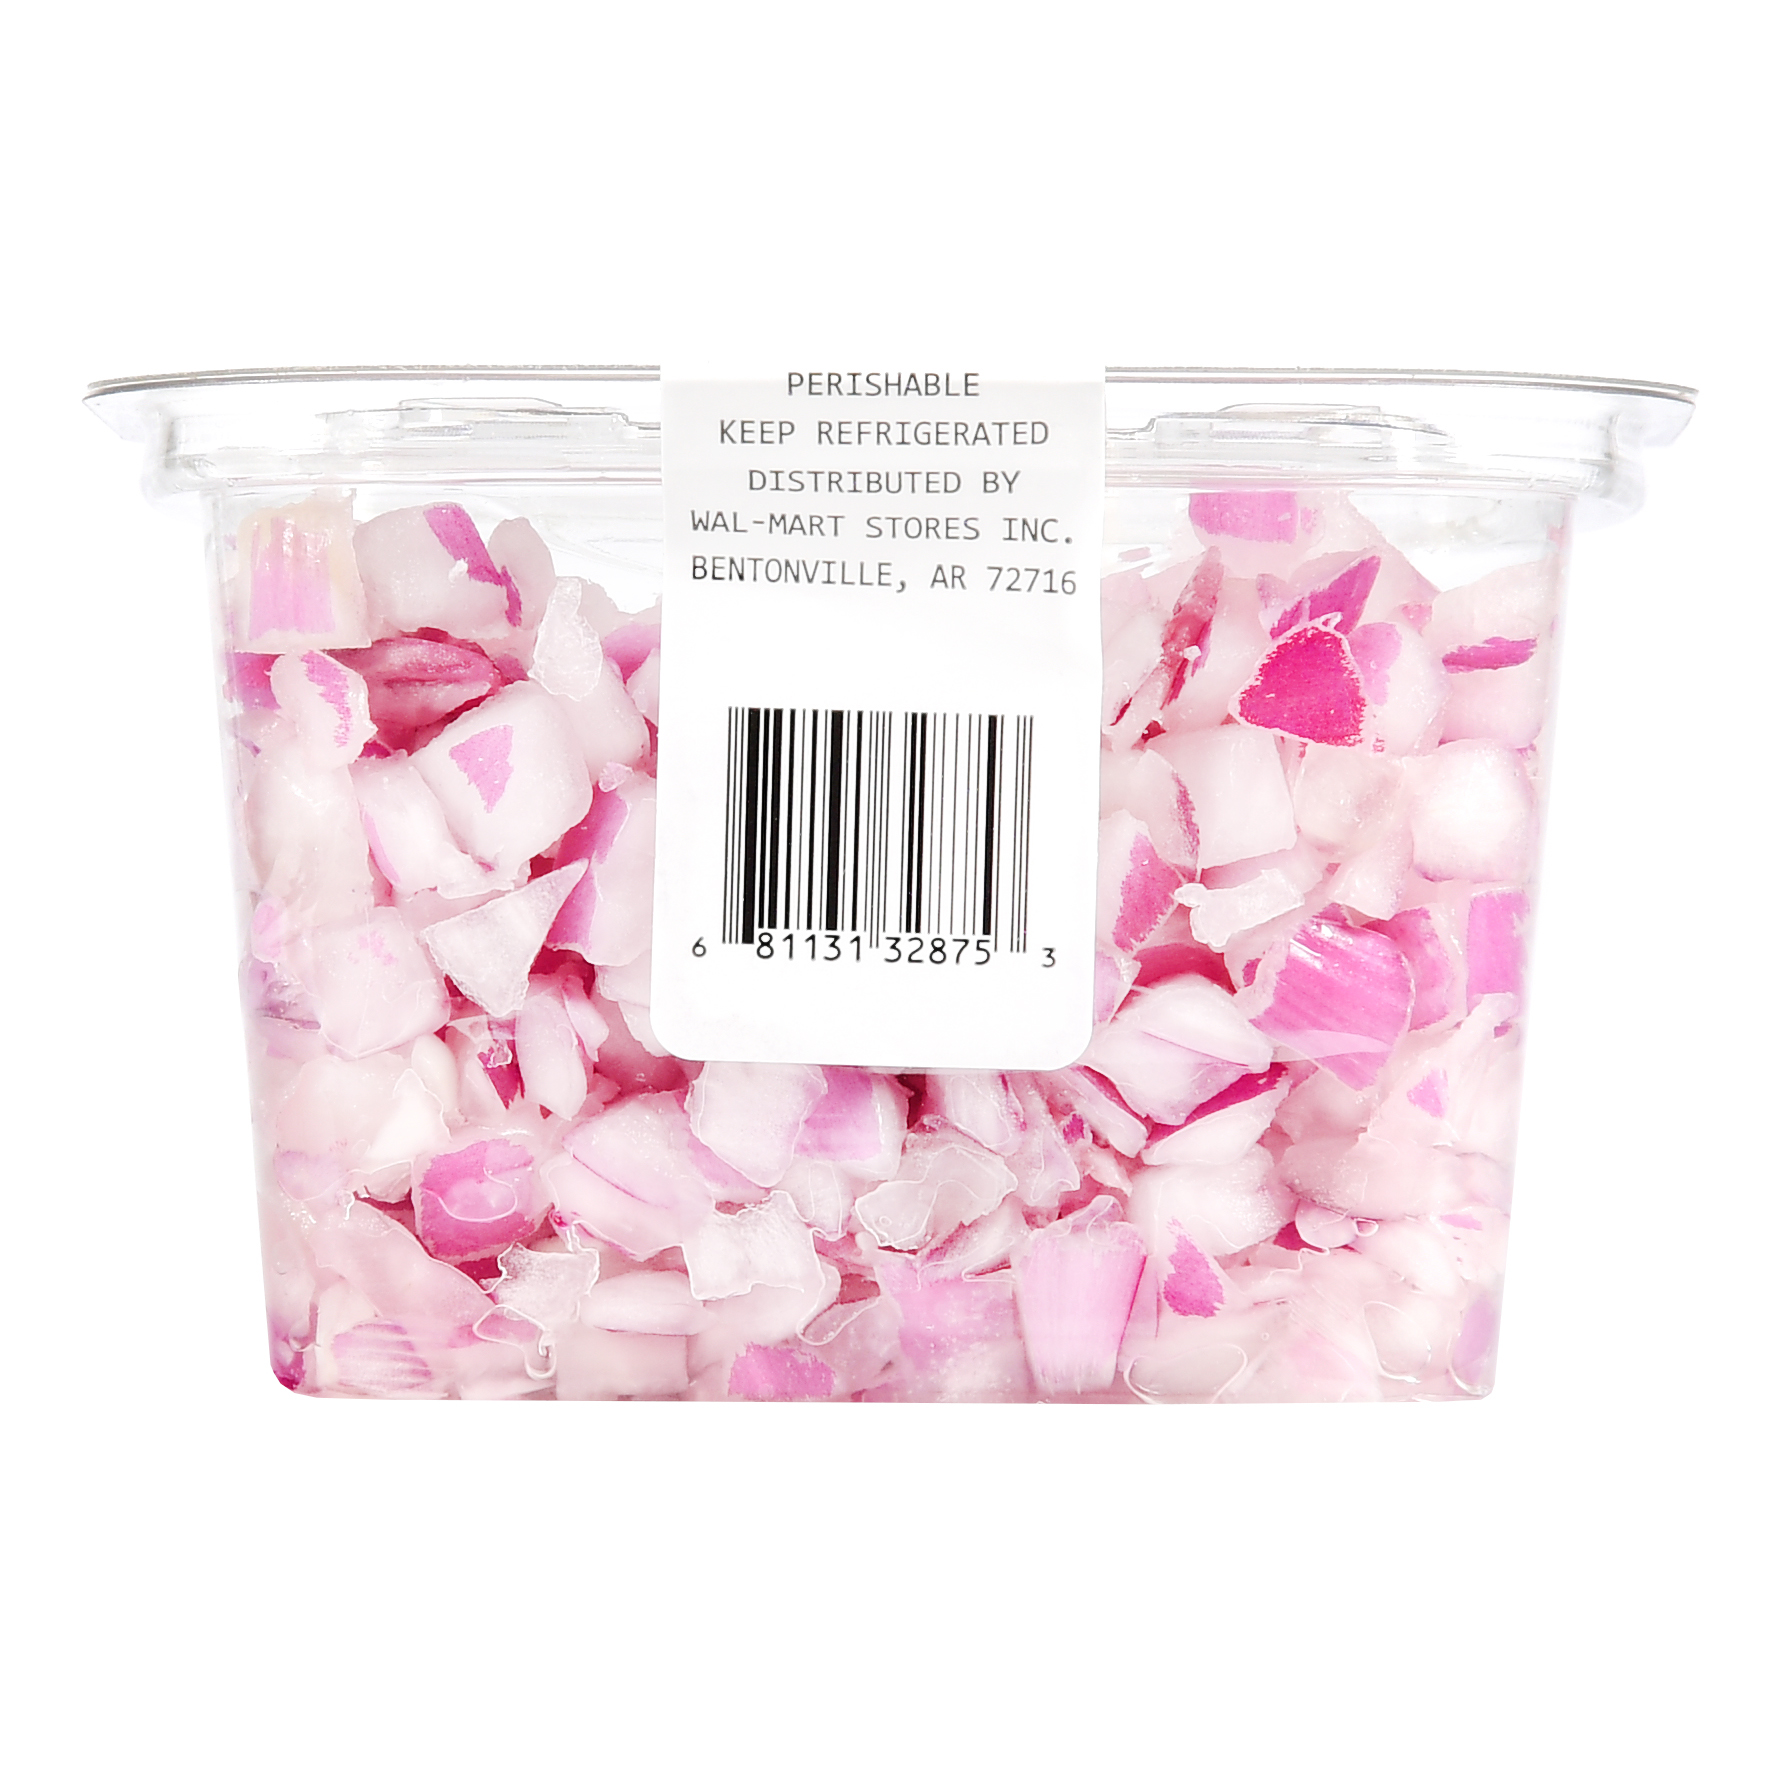 Freshness Guaranteed Diced Red Onions, 8 oz - image 4 of 5